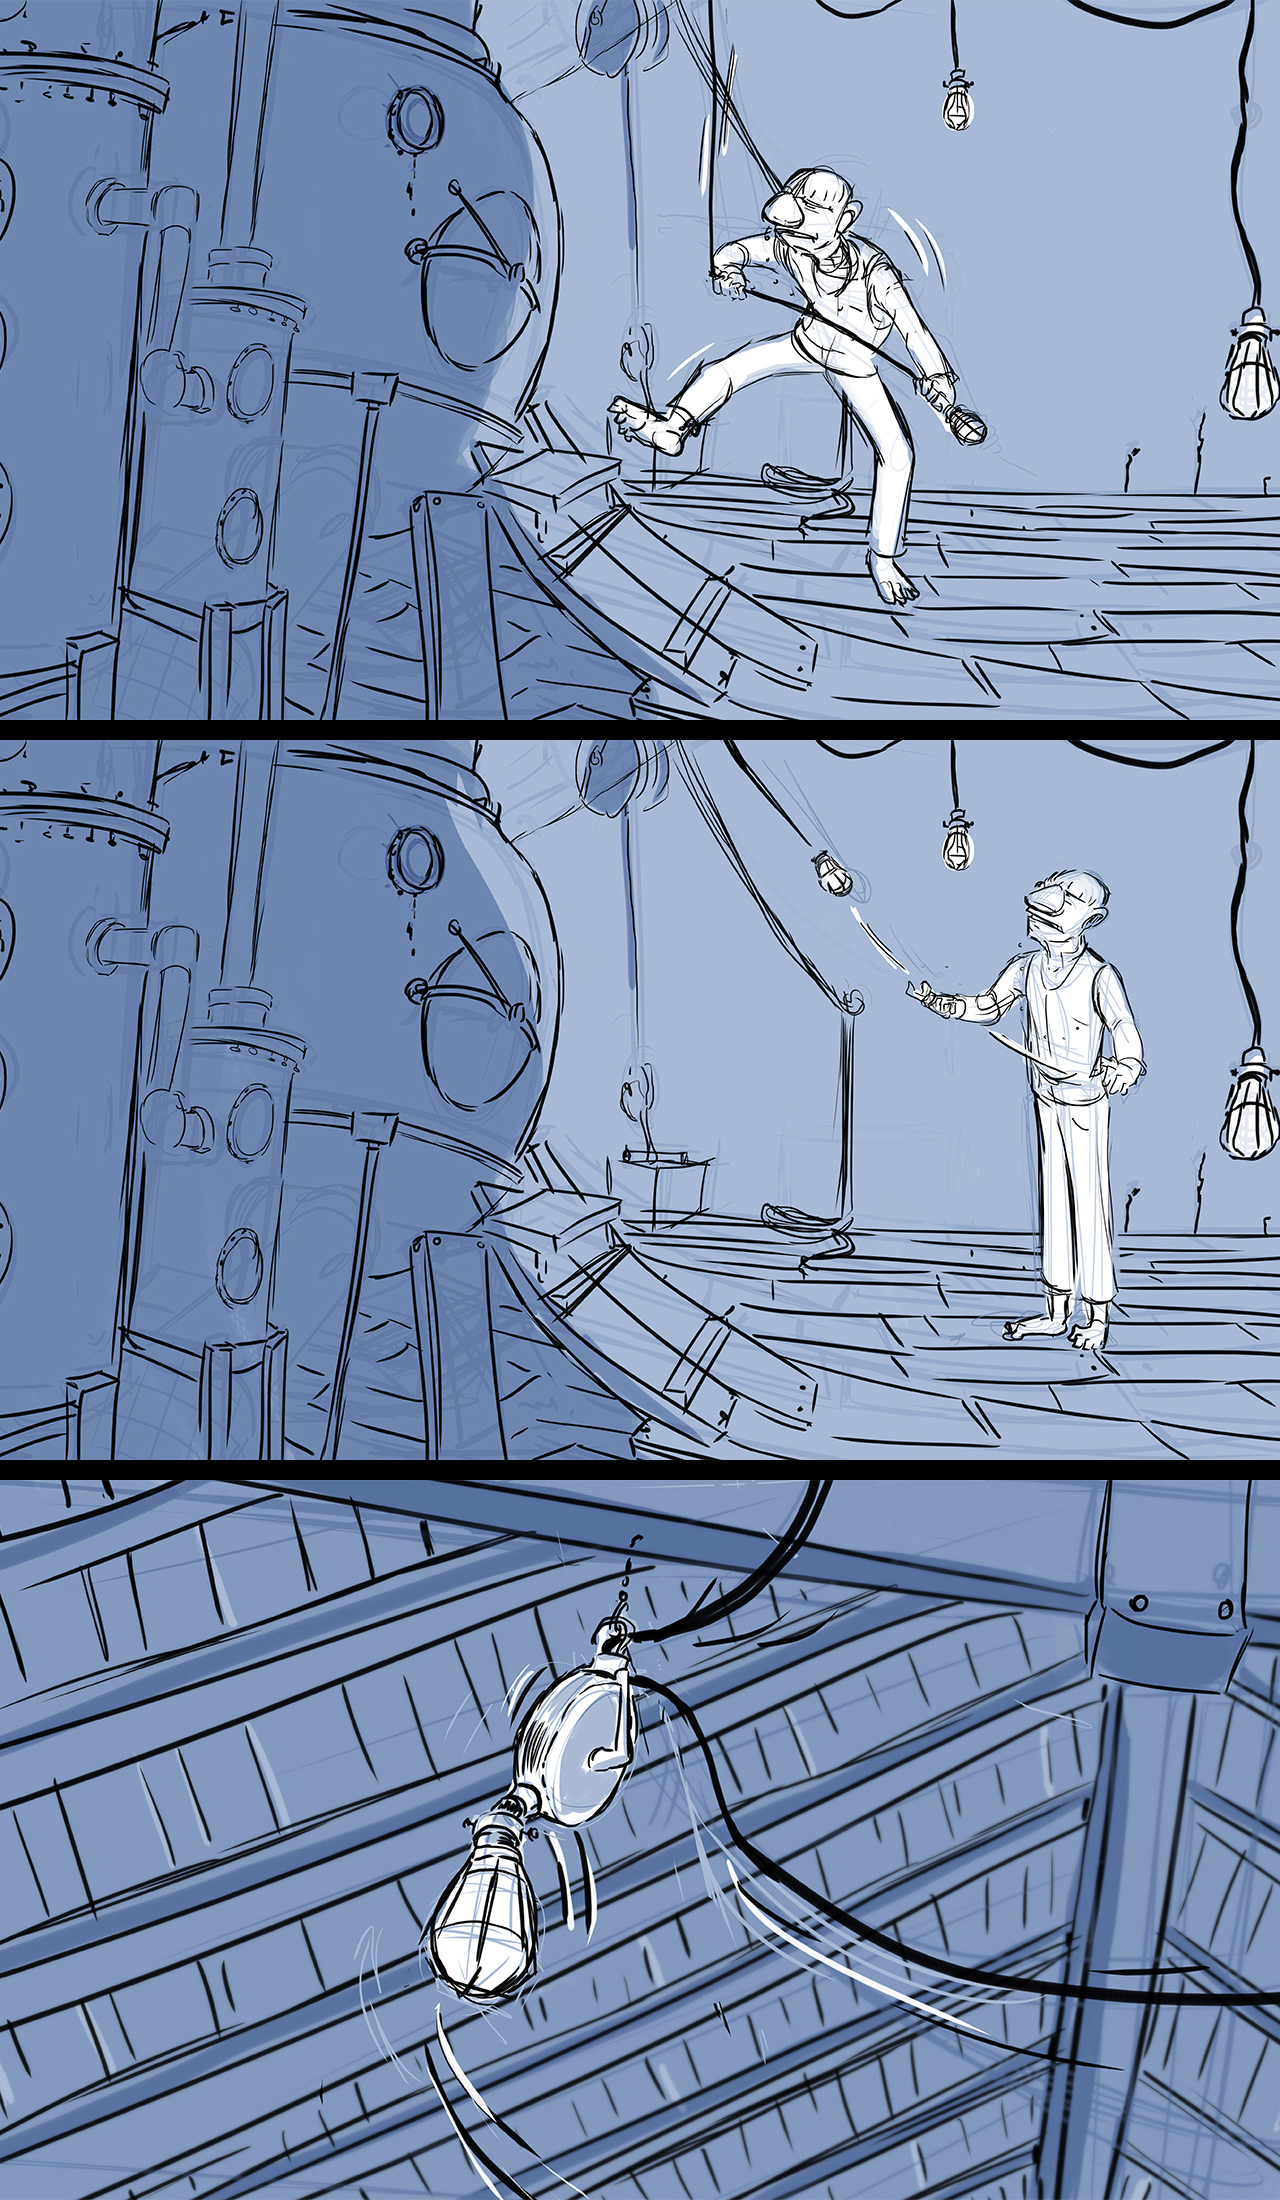 Storyboard sequence from an animated film. Sequence shows man stepping away grom gin still and letting go a light bulb.